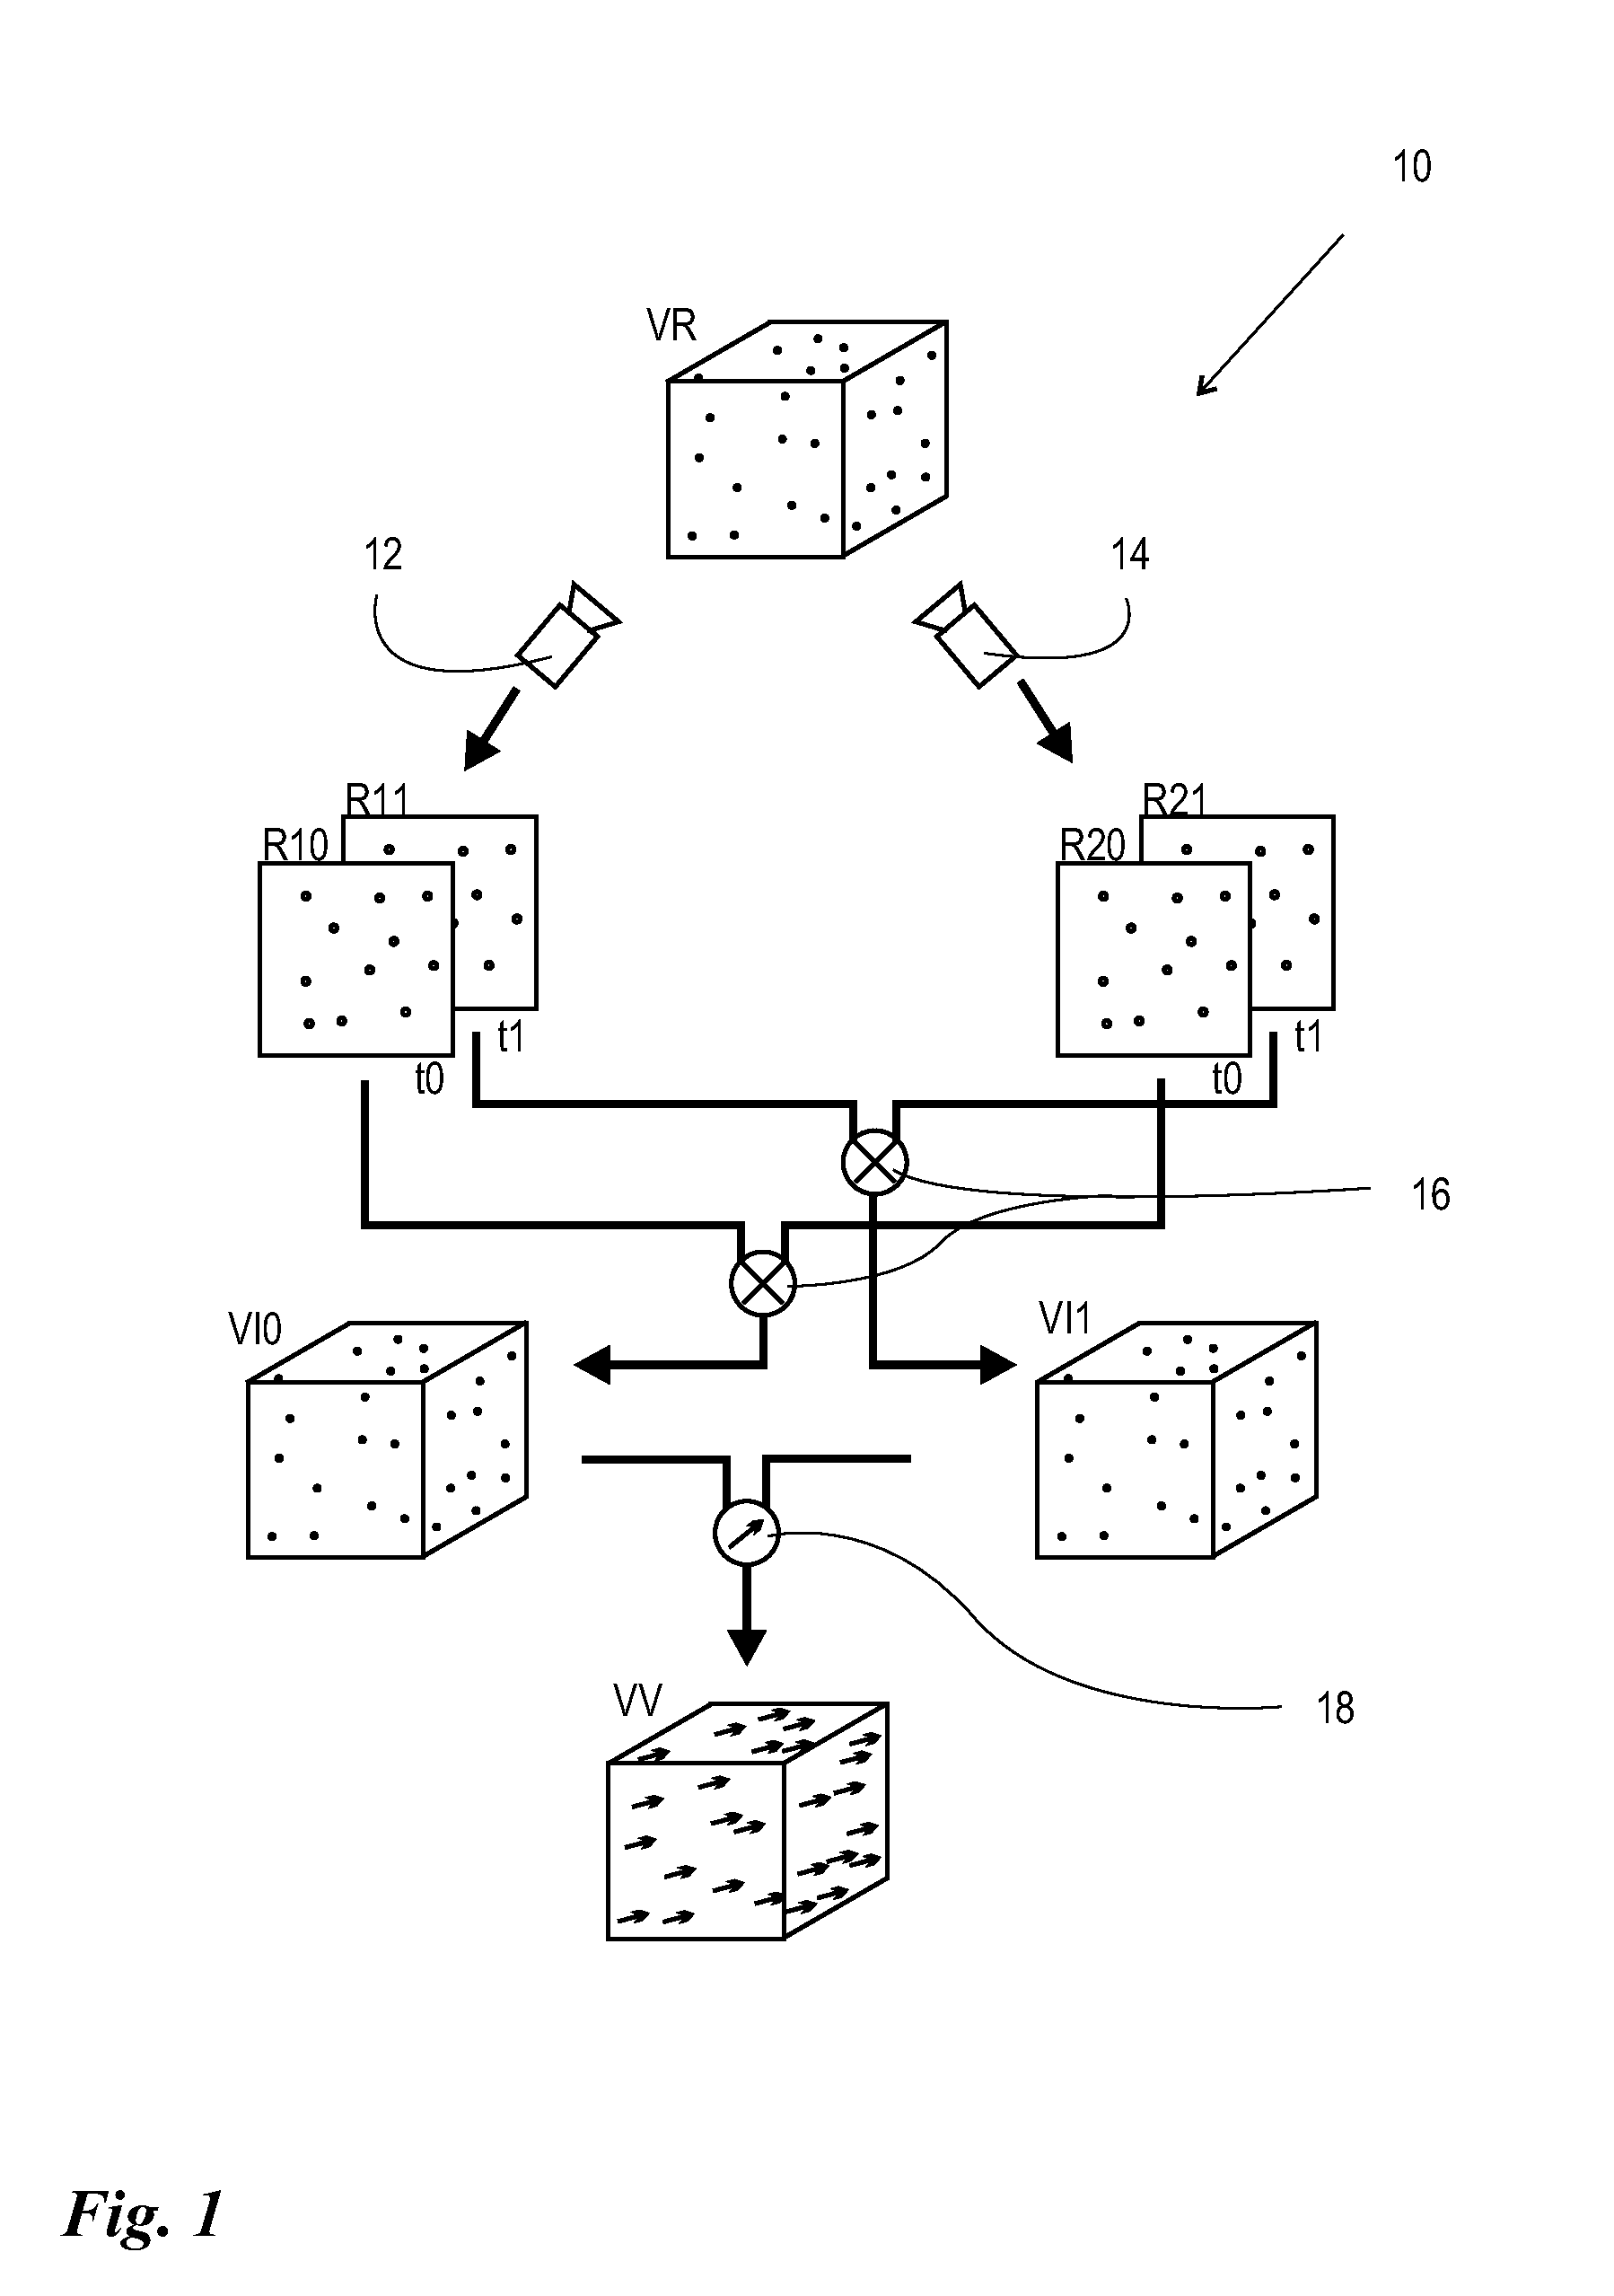 Method for Determining Flow Conditions